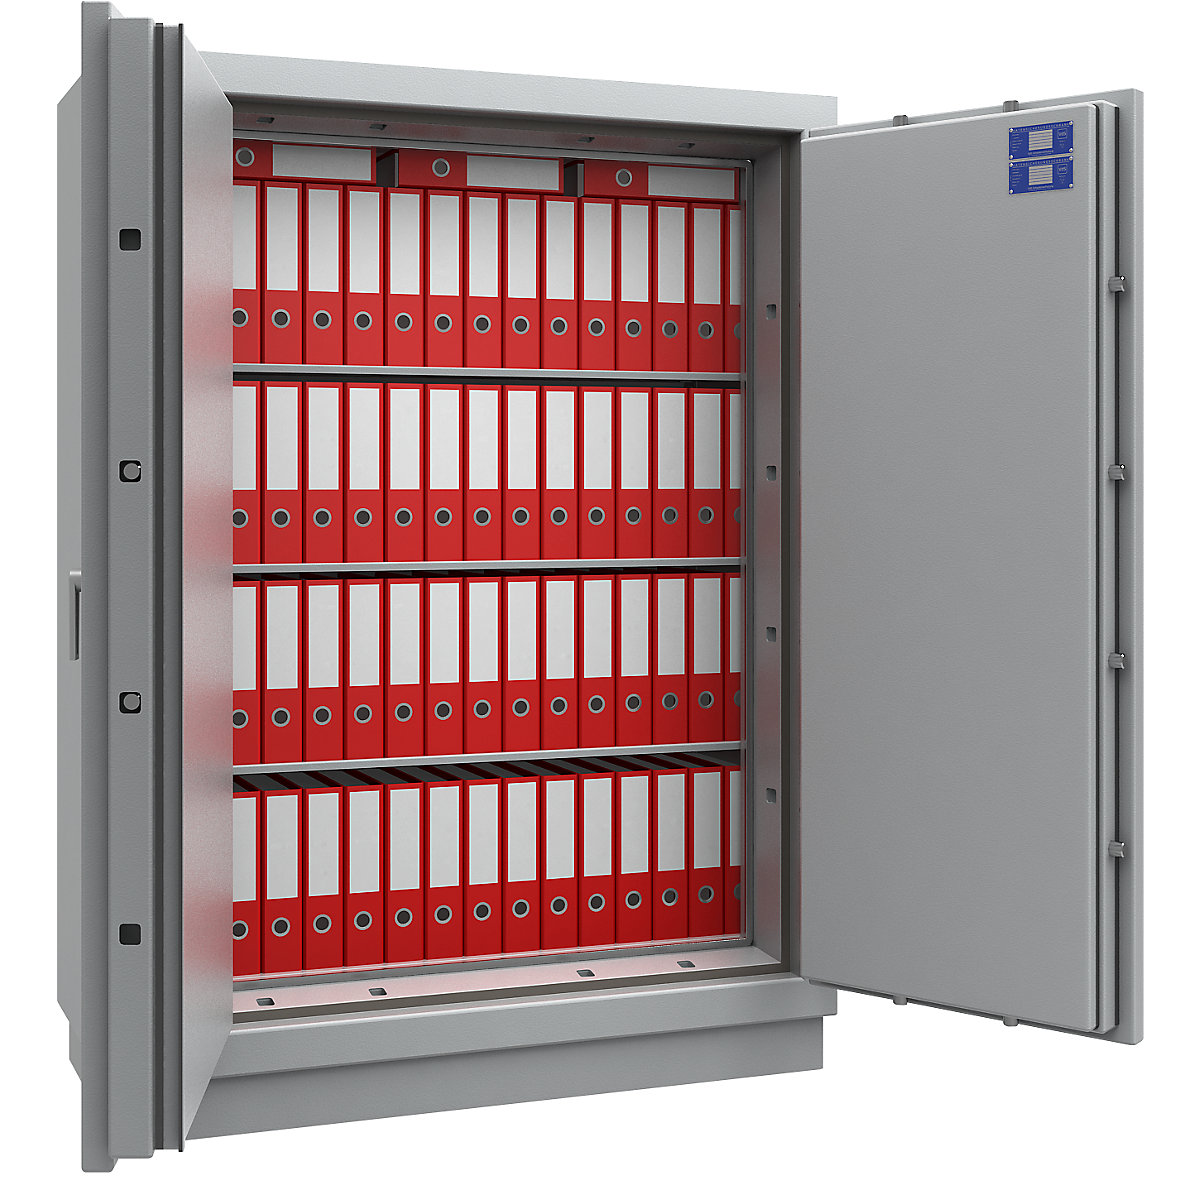 Fire resistant safety cabinet, VDMA B, S2, S 120 P, HxWxD 1800 x 1350 x 560 mm-10